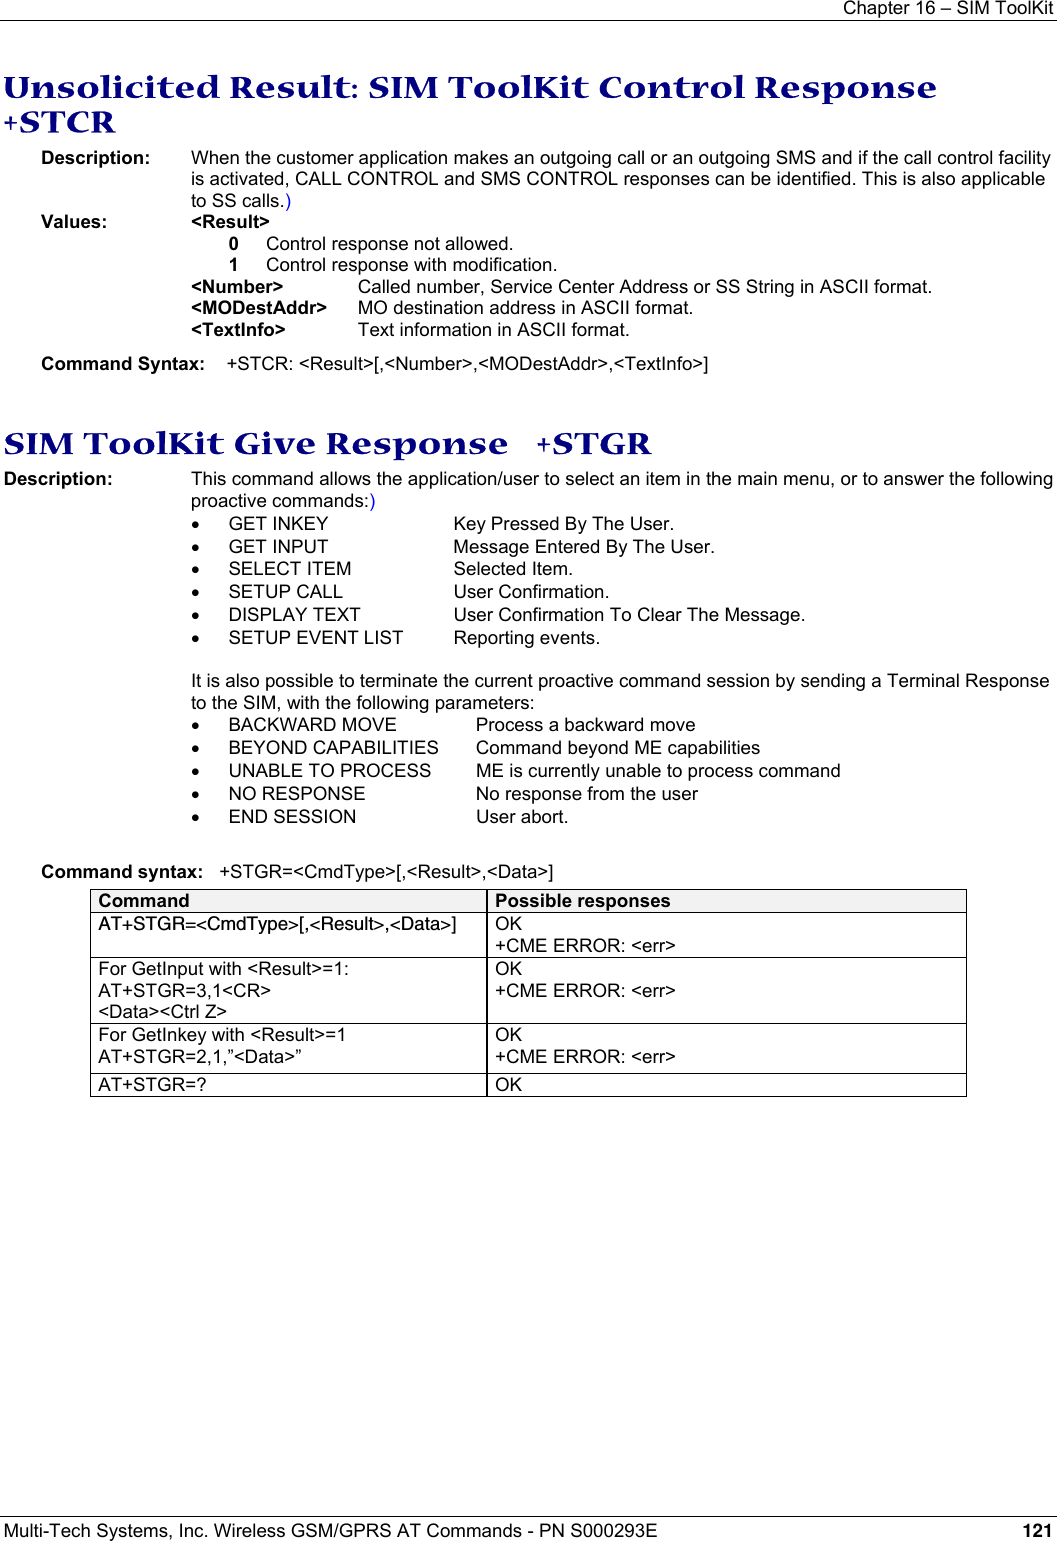 Chapter 16 – SIM ToolKit  Multi-Tech Systems, Inc. Wireless GSM/GPRS AT Commands - PN S000293E 121  Unsolicited Result: SIM ToolKit Control Response   +STCR Description:  When the customer application makes an outgoing call or an outgoing SMS and if the call control facility is activated, CALL CONTROL and SMS CONTROL responses can be identified. This is also applicable to SS calls.) Values: &lt;Result&gt;   0  Control response not allowed. 1  Control response with modification. &lt;Number&gt;    Called number, Service Center Address or SS String in ASCII format. &lt;MODestAddr&gt;  MO destination address in ASCII format. &lt;TextInfo&gt;   Text information in ASCII format. Command Syntax:    +STCR: &lt;Result&gt;[,&lt;Number&gt;,&lt;MODestAddr&gt;,&lt;TextInfo&gt;]   SIM ToolKit Give Response   +STGR Description:  This command allows the application/user to select an item in the main menu, or to answer the following proactive commands:) •  GET INKEY  Key Pressed By The User. •  GET INPUT  Message Entered By The User. •  SELECT ITEM  Selected Item. •  SETUP CALL  User Confirmation. •  DISPLAY TEXT  User Confirmation To Clear The Message. •  SETUP EVENT LIST  Reporting events.  It is also possible to terminate the current proactive command session by sending a Terminal Response to the SIM, with the following parameters: •  BACKWARD MOVE    Process a backward move •  BEYOND CAPABILITIES    Command beyond ME capabilities •  UNABLE TO PROCESS    ME is currently unable to process command •  NO RESPONSE    No response from the user •  END SESSION    User abort.  Command syntax:   +STGR=&lt;CmdType&gt;[,&lt;Result&gt;,&lt;Data&gt;] Command  Possible responses AT+STGR=&lt;CmdType&gt;[,&lt;Result&gt;,&lt;Data&gt;]  OK +CME ERROR: &lt;err&gt; For GetInput with &lt;Result&gt;=1: AT+STGR=3,1&lt;CR&gt; &lt;Data&gt;&lt;Ctrl Z&gt; OK +CME ERROR: &lt;err&gt; For GetInkey with &lt;Result&gt;=1 AT+STGR=2,1,”&lt;Data&gt;” OK +CME ERROR: &lt;err&gt; AT+STGR=? OK  